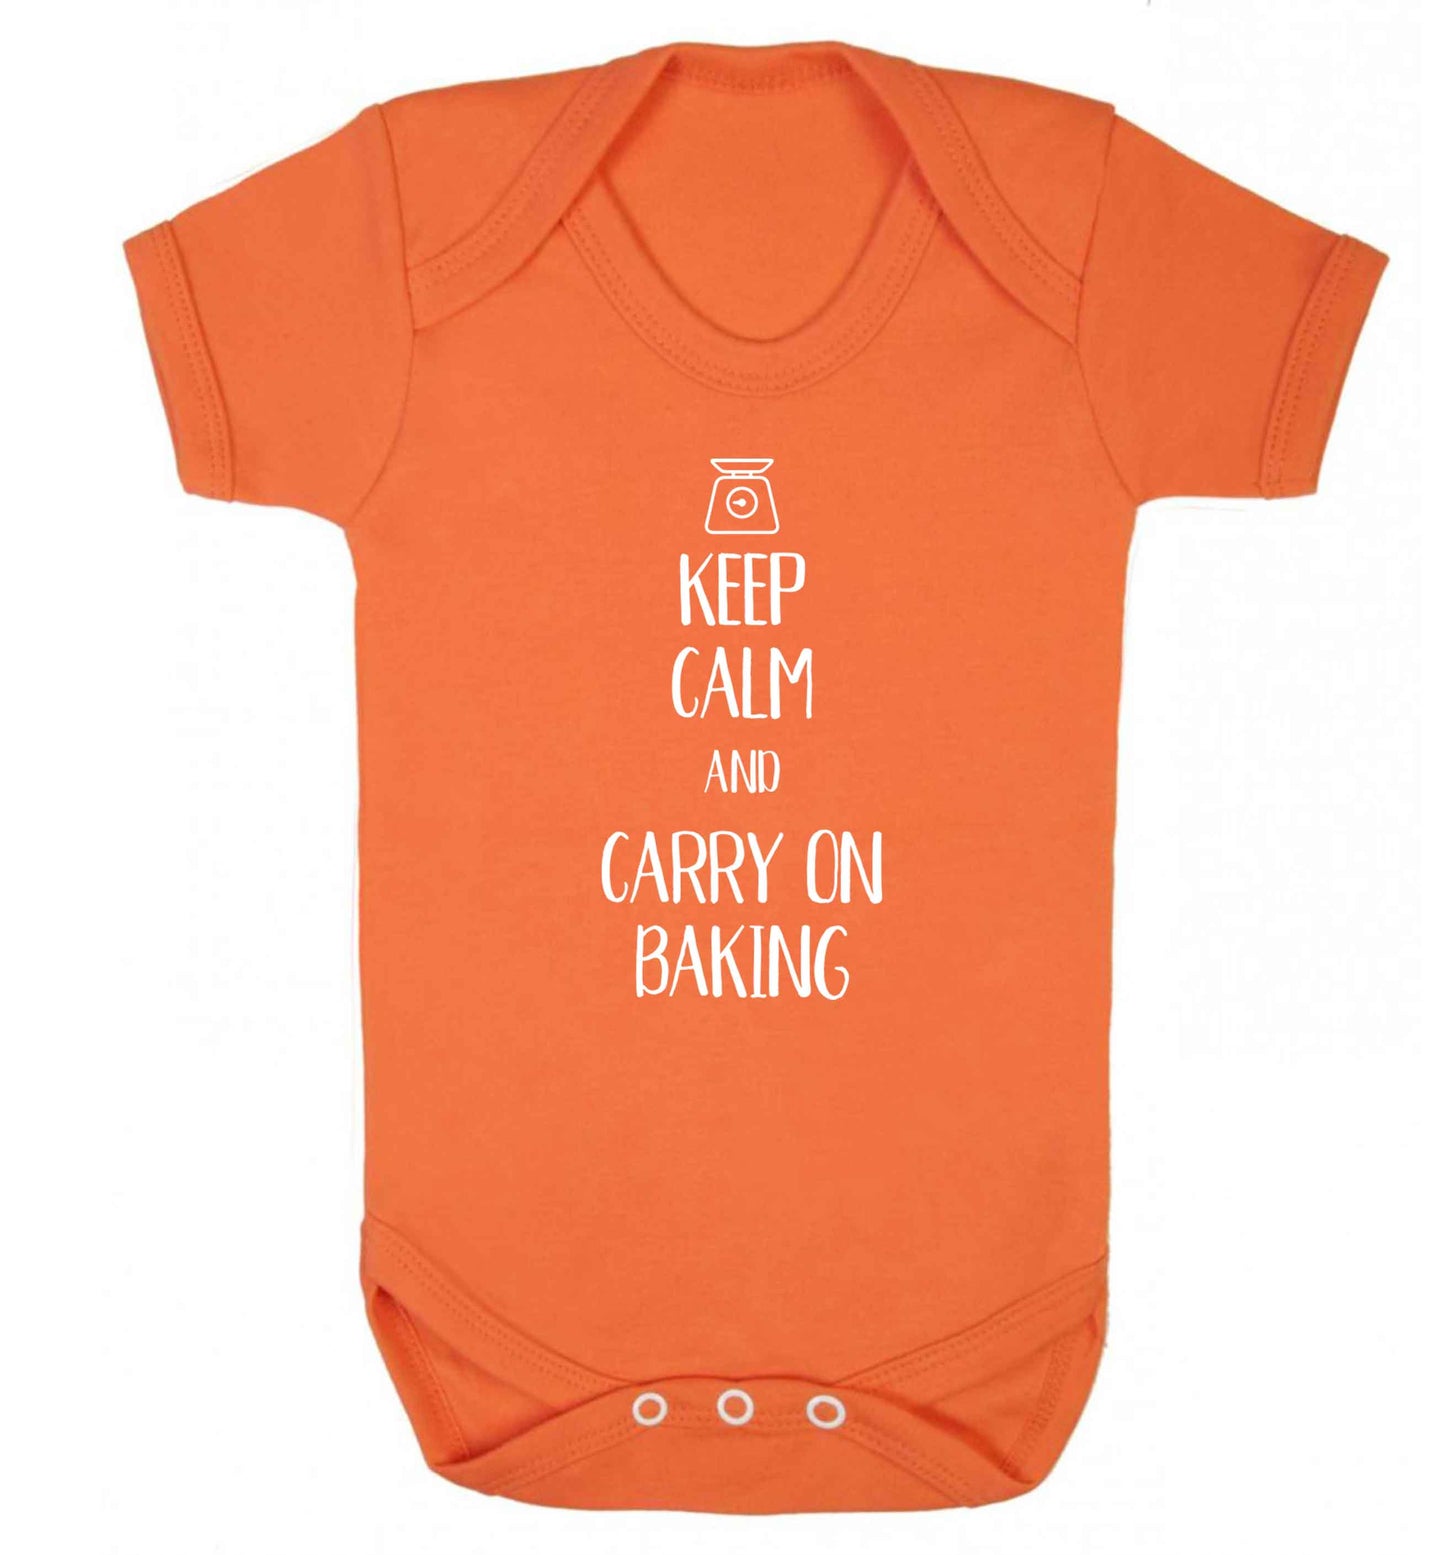 Keep calm and carry on baking Baby Vest orange 18-24 months